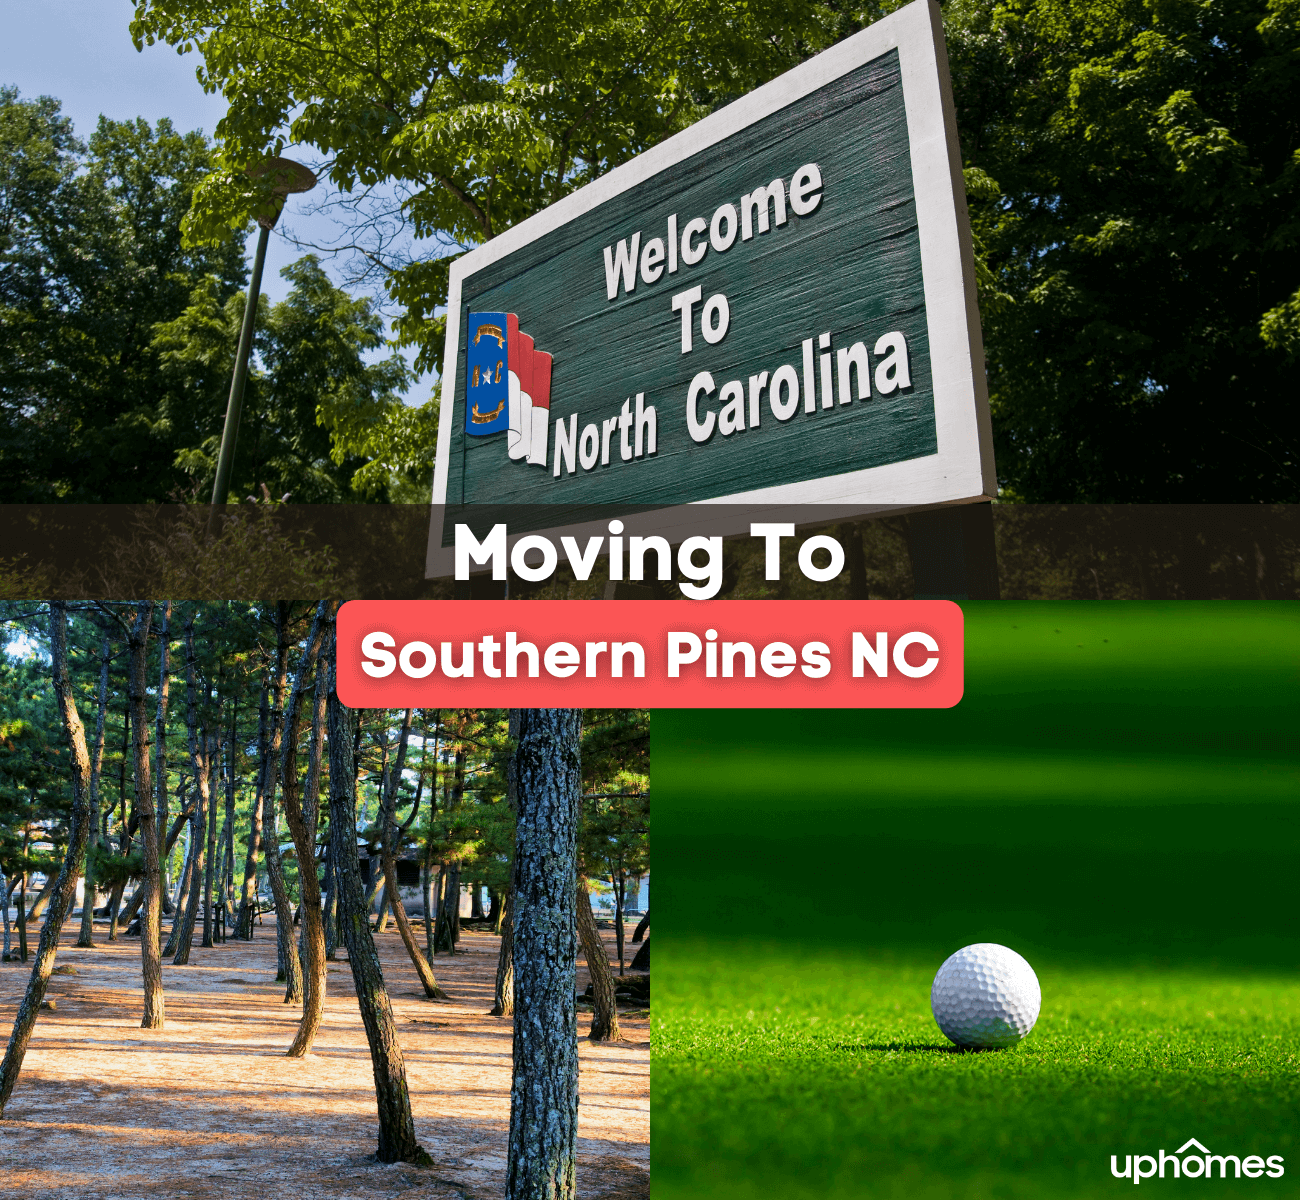 Moving to Southern Pines, NC - What is it like living in Southern Pines North Carolina?